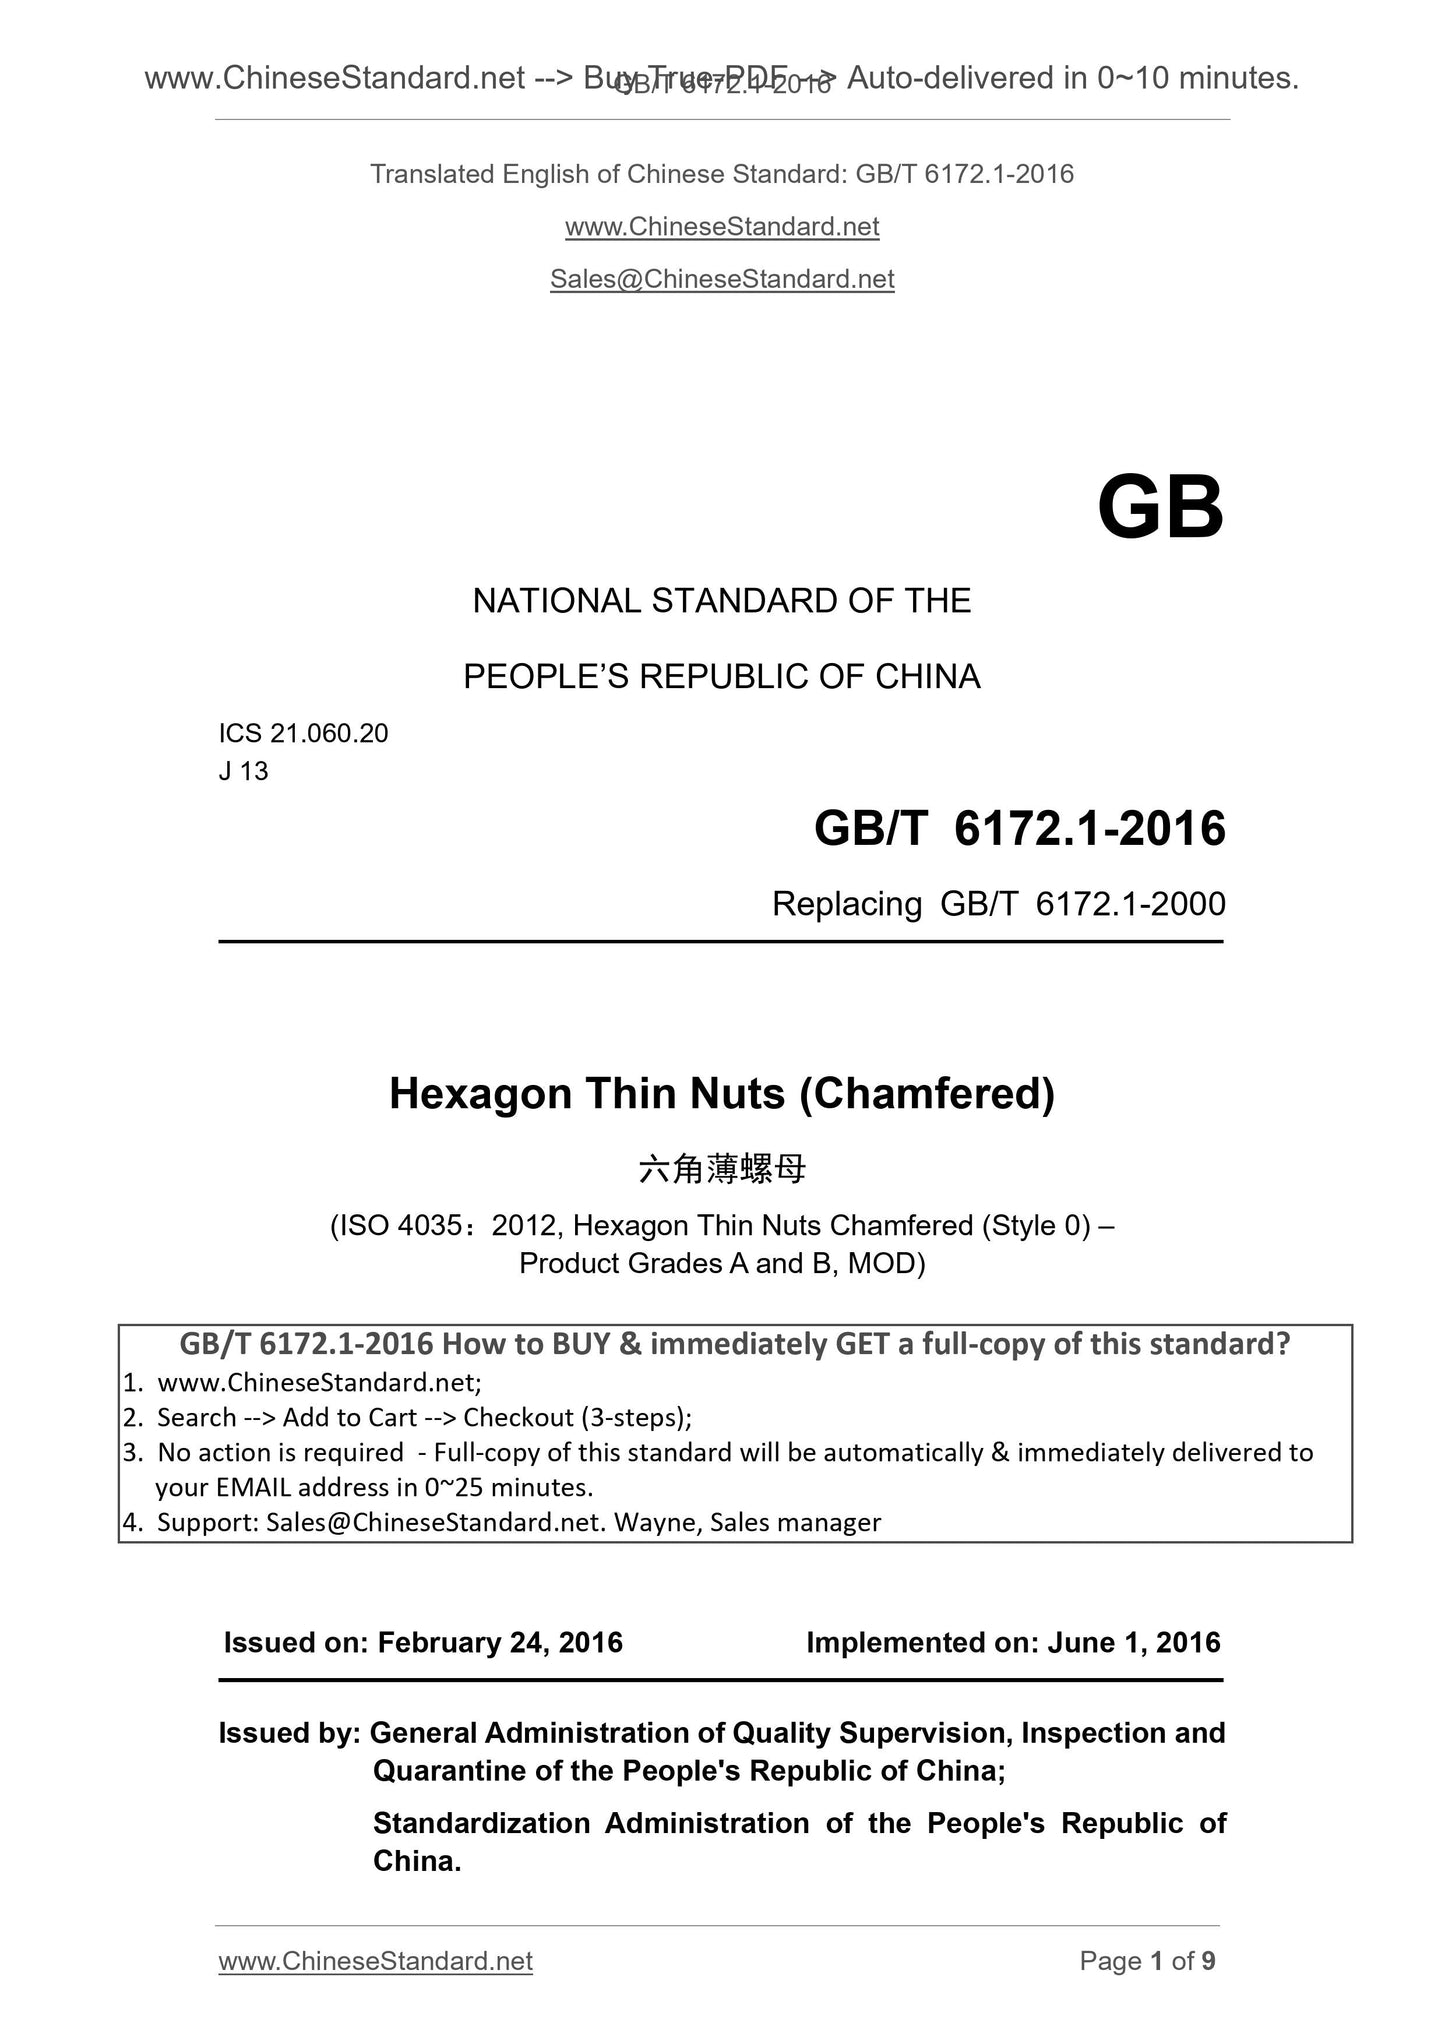 GB/T 6172.1-2016 Page 1